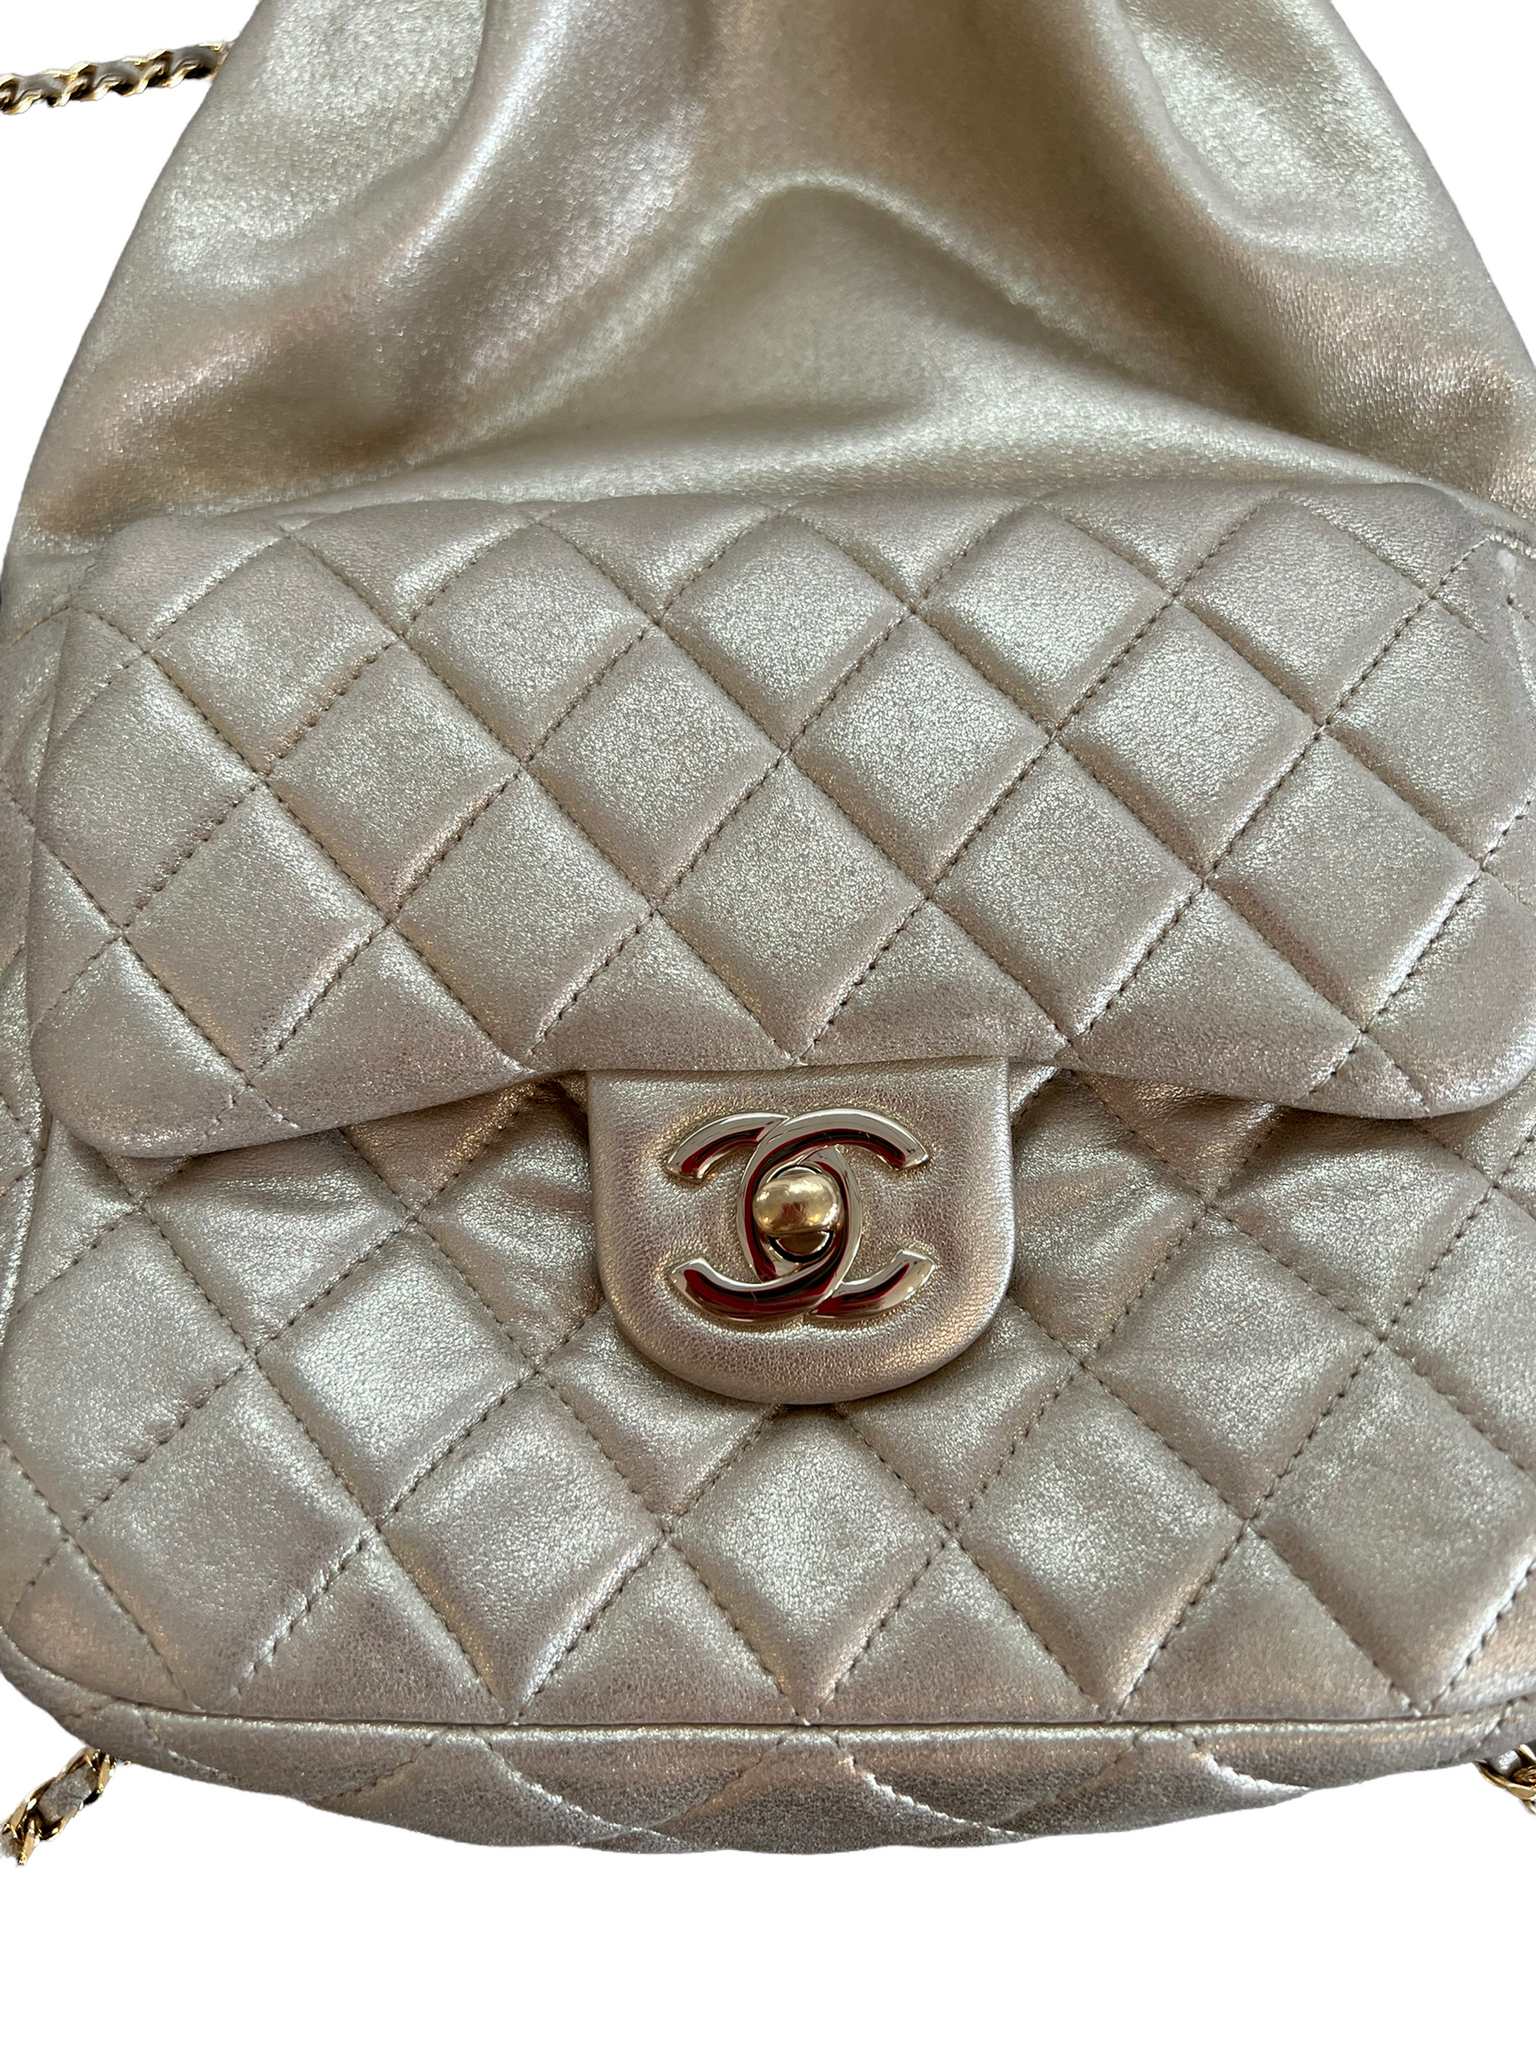 CHANEL Shiny Calfskin Quilted Chanel 22 Drawstring Bag Coral Pink 996746